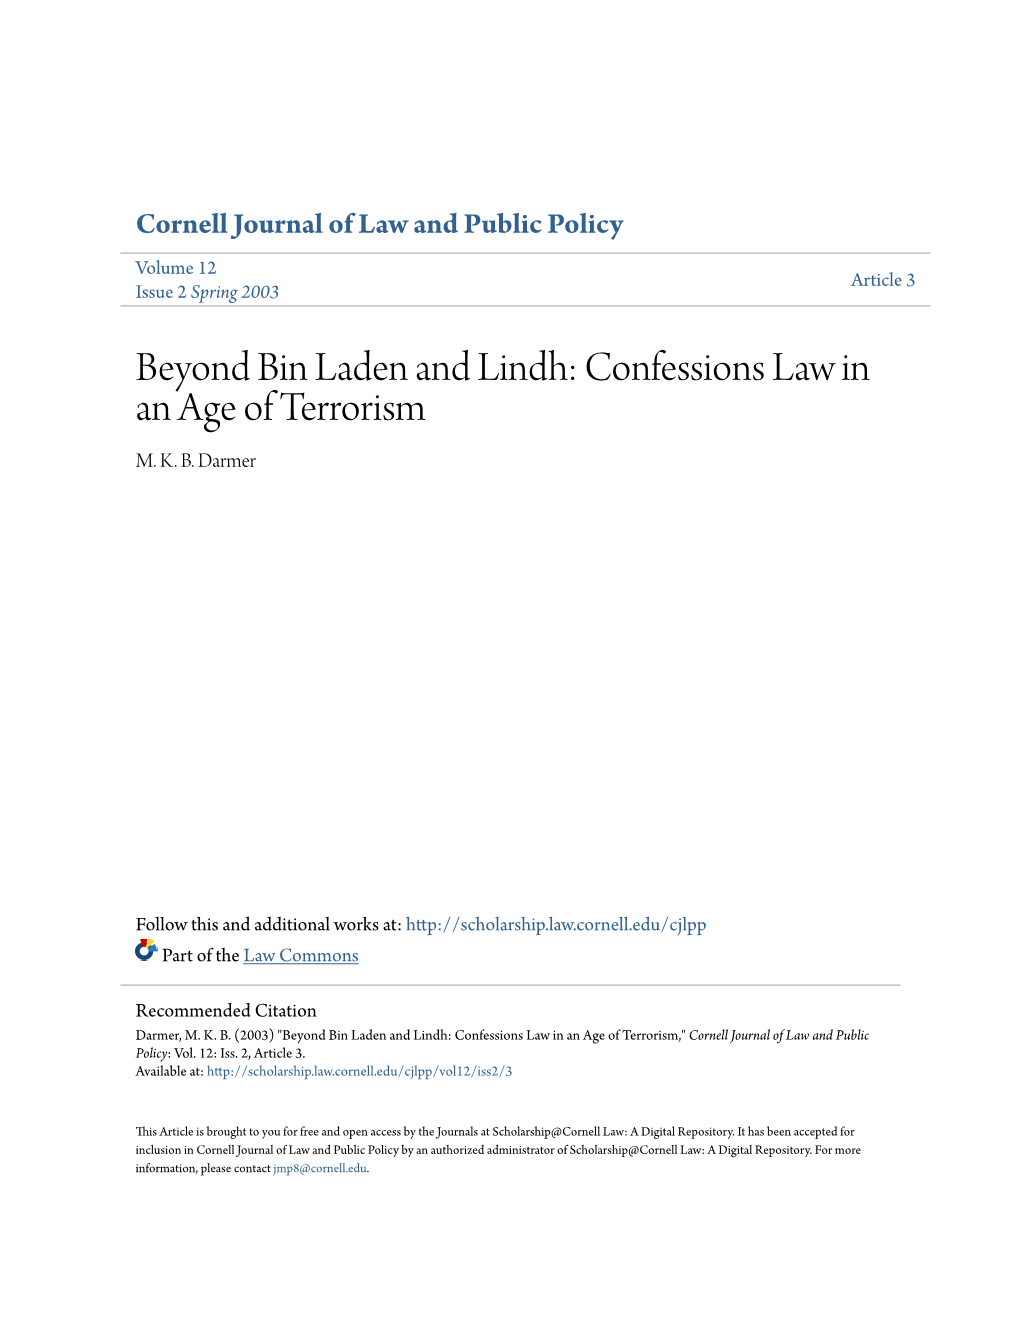 Beyond Bin Laden and Lindh: Confessions Law in an Age of Terrorism M